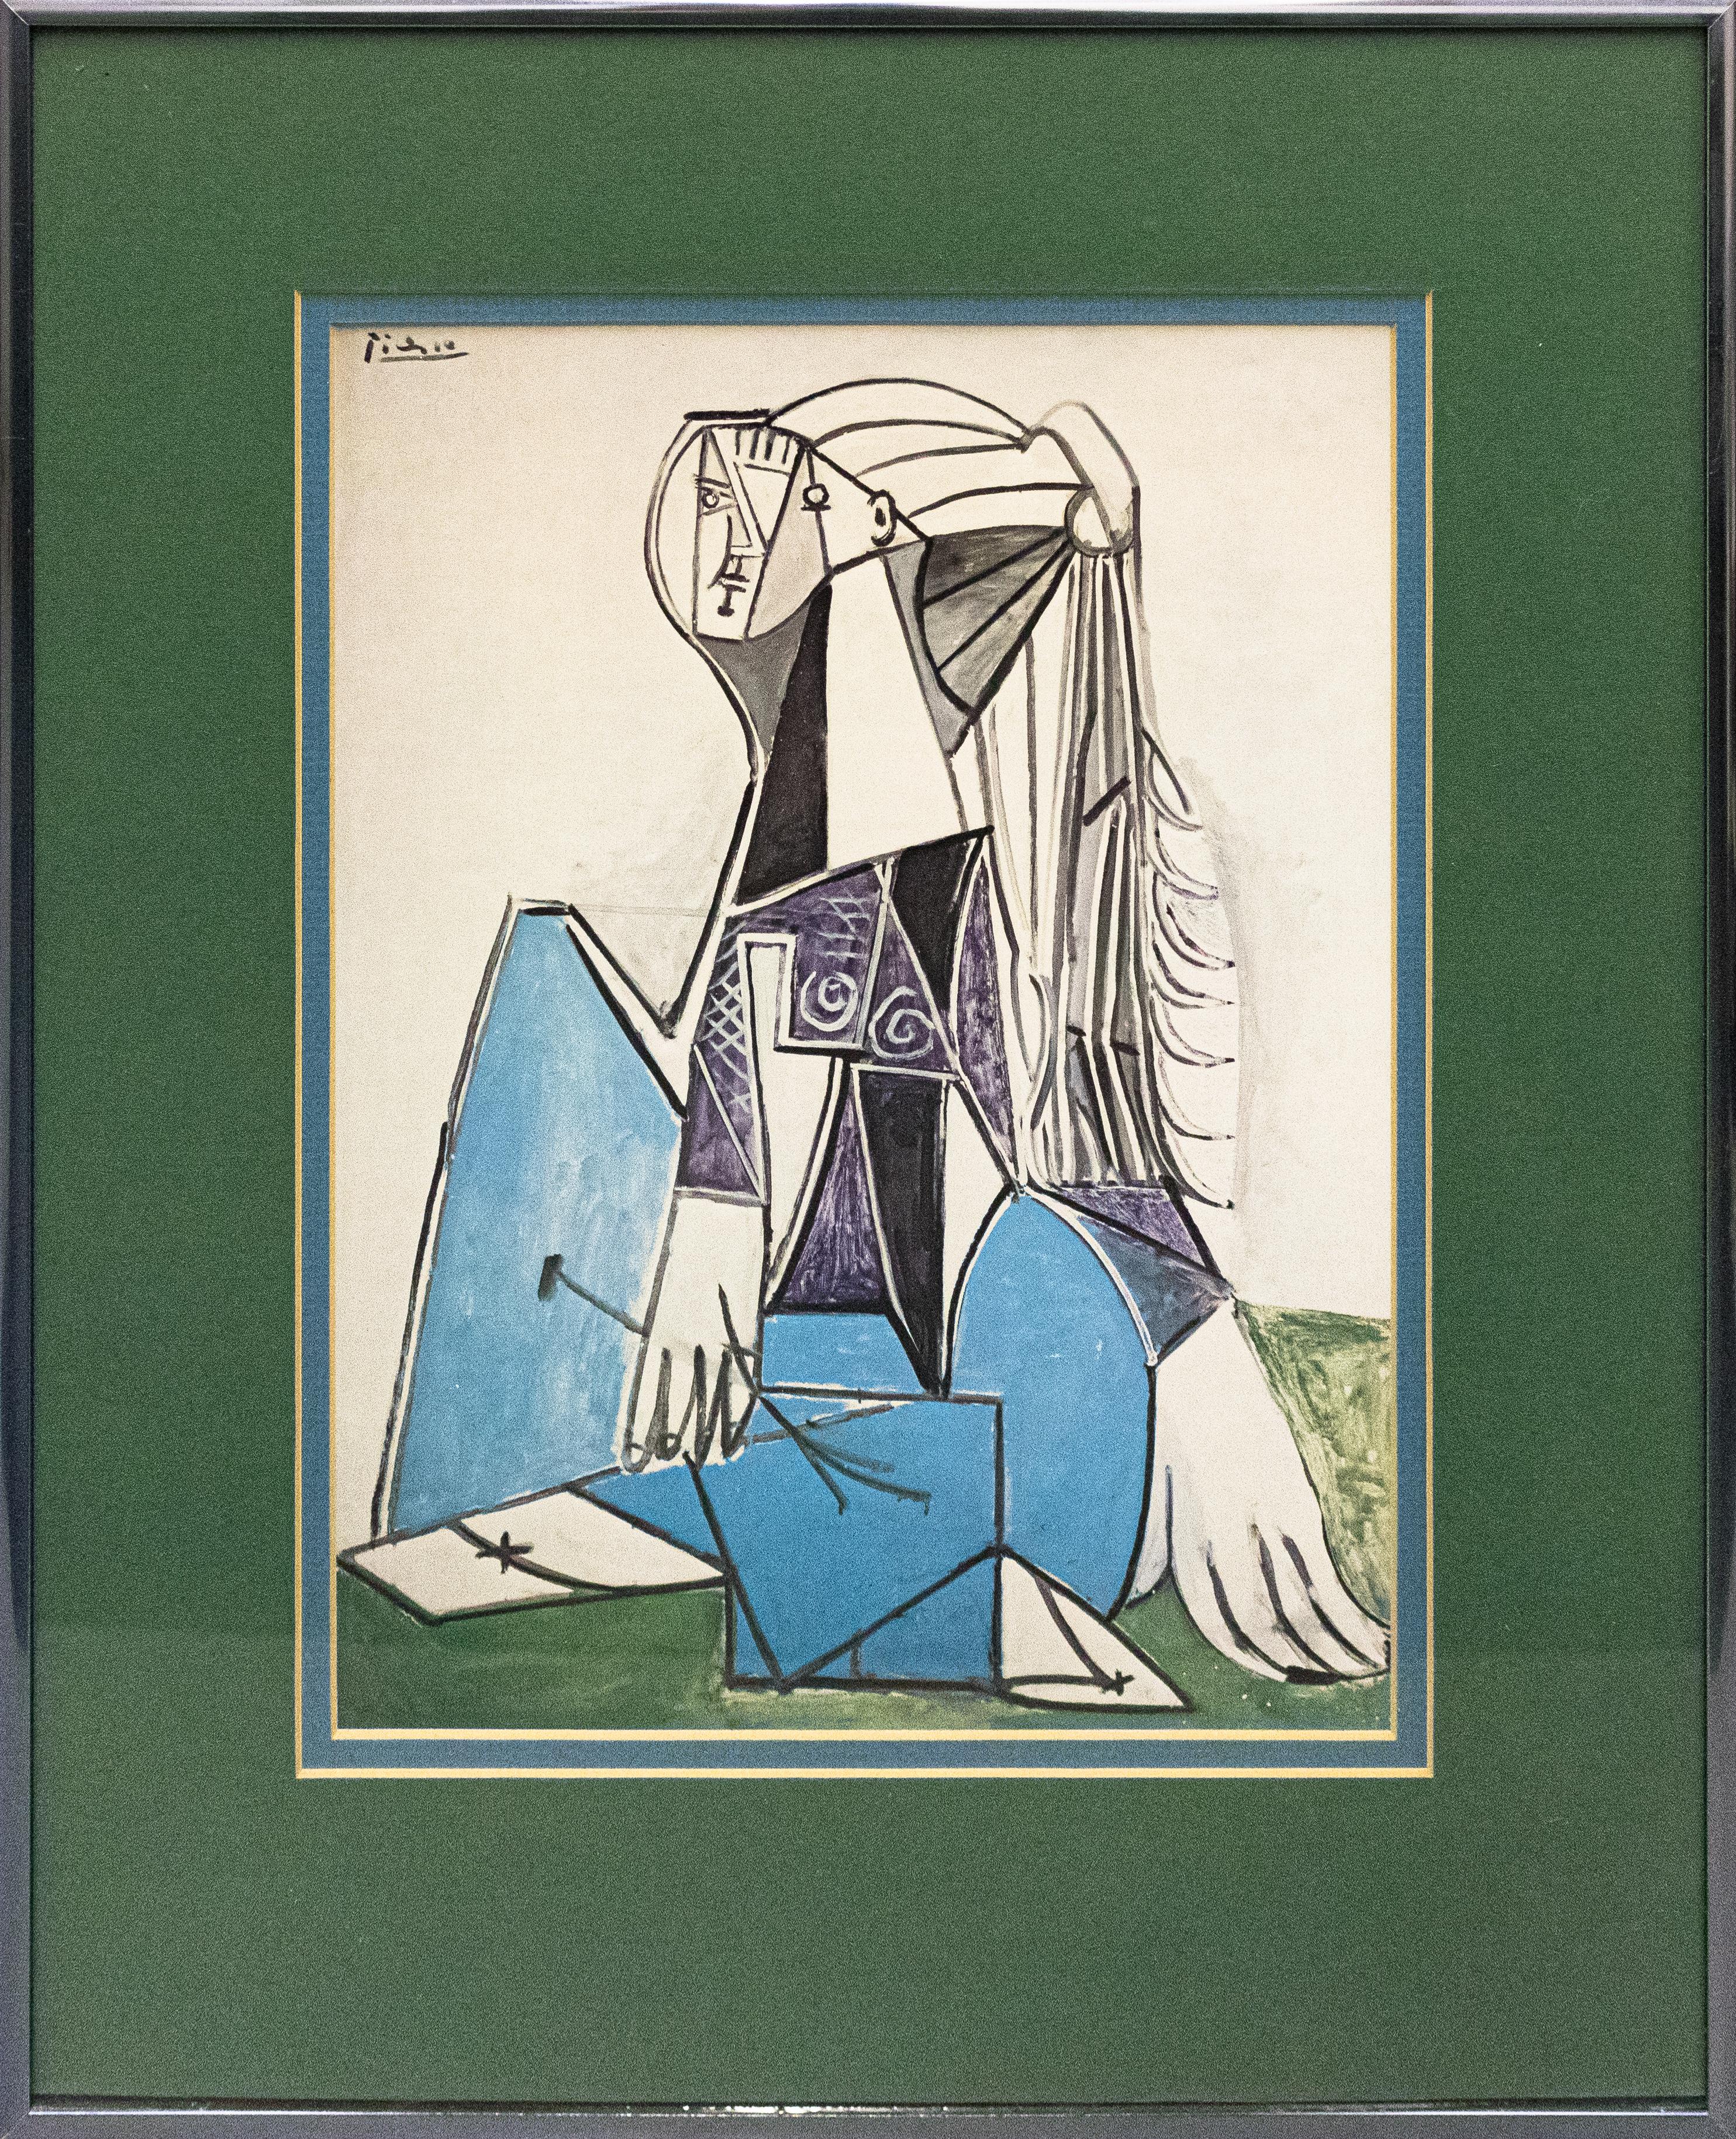 "Portrait of Sylvette David" Framed Lithograph After Pablo Picasso  - Print by (after) Pablo Picasso